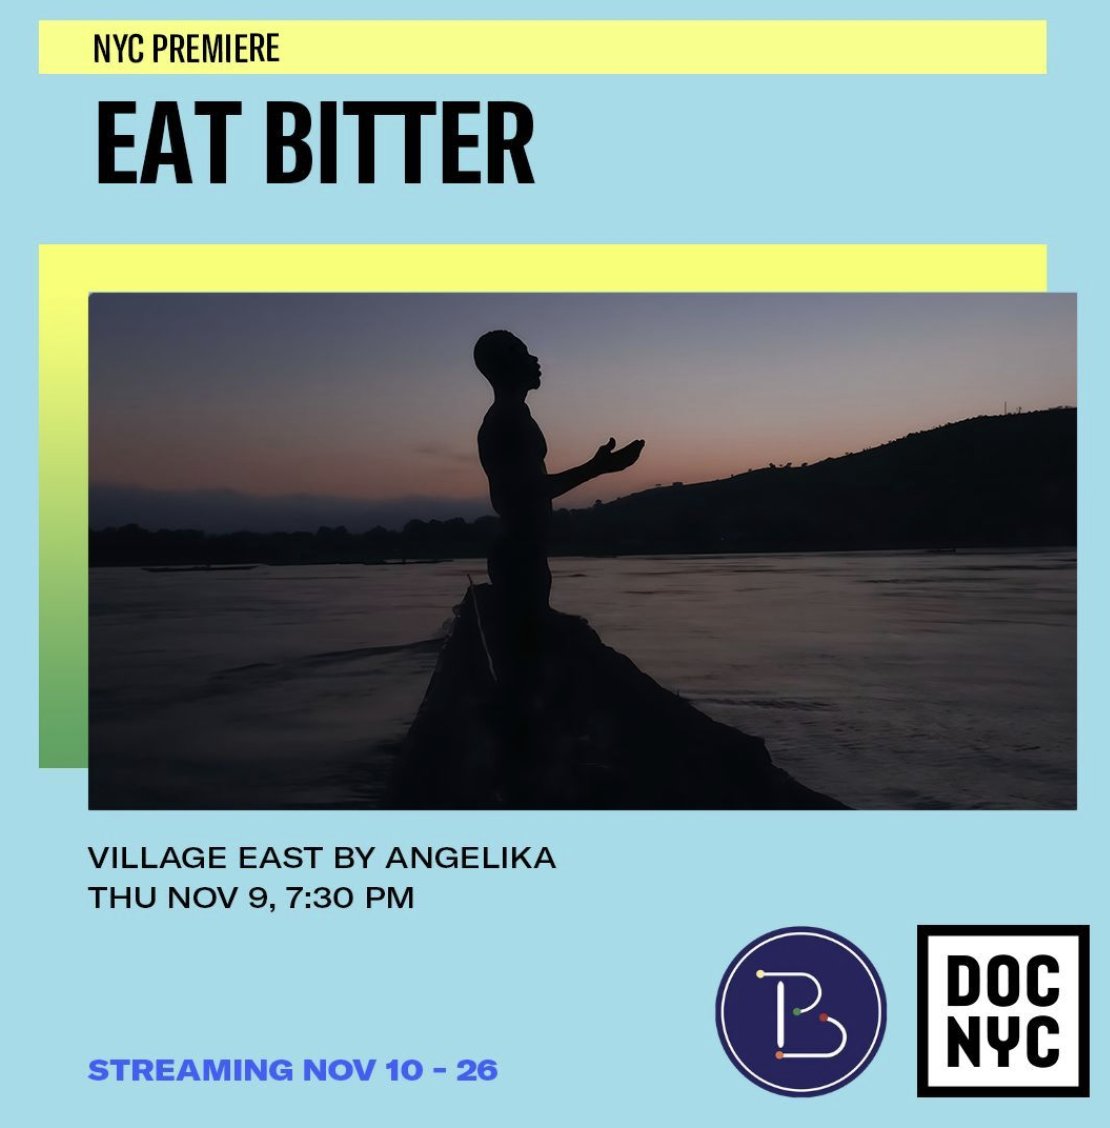 Join us tonight! 7.30pm, Village East By Angelika @chickeneggpics @IEFTA_Org @FordFoundation @sundanceorg @HotDocs @AADocNetwork @blindianproject @AfricanFilmFest @DOCNYCfest